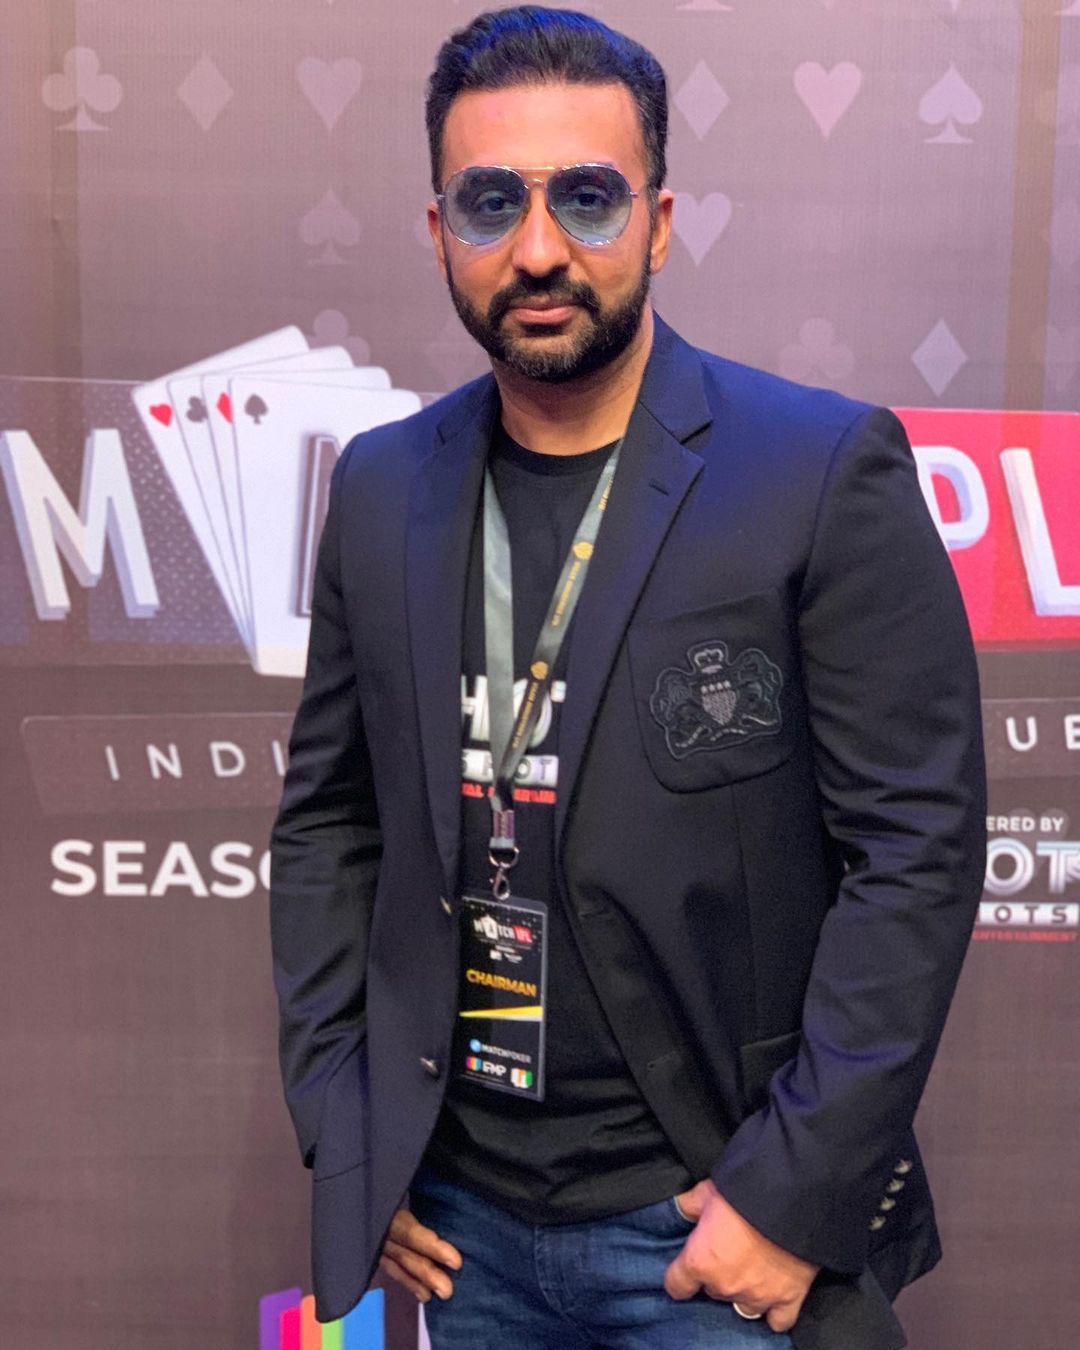 Raj Kundra's arrest based on Whatsapp chats where revenue and production of adult films was discussed with 4 others